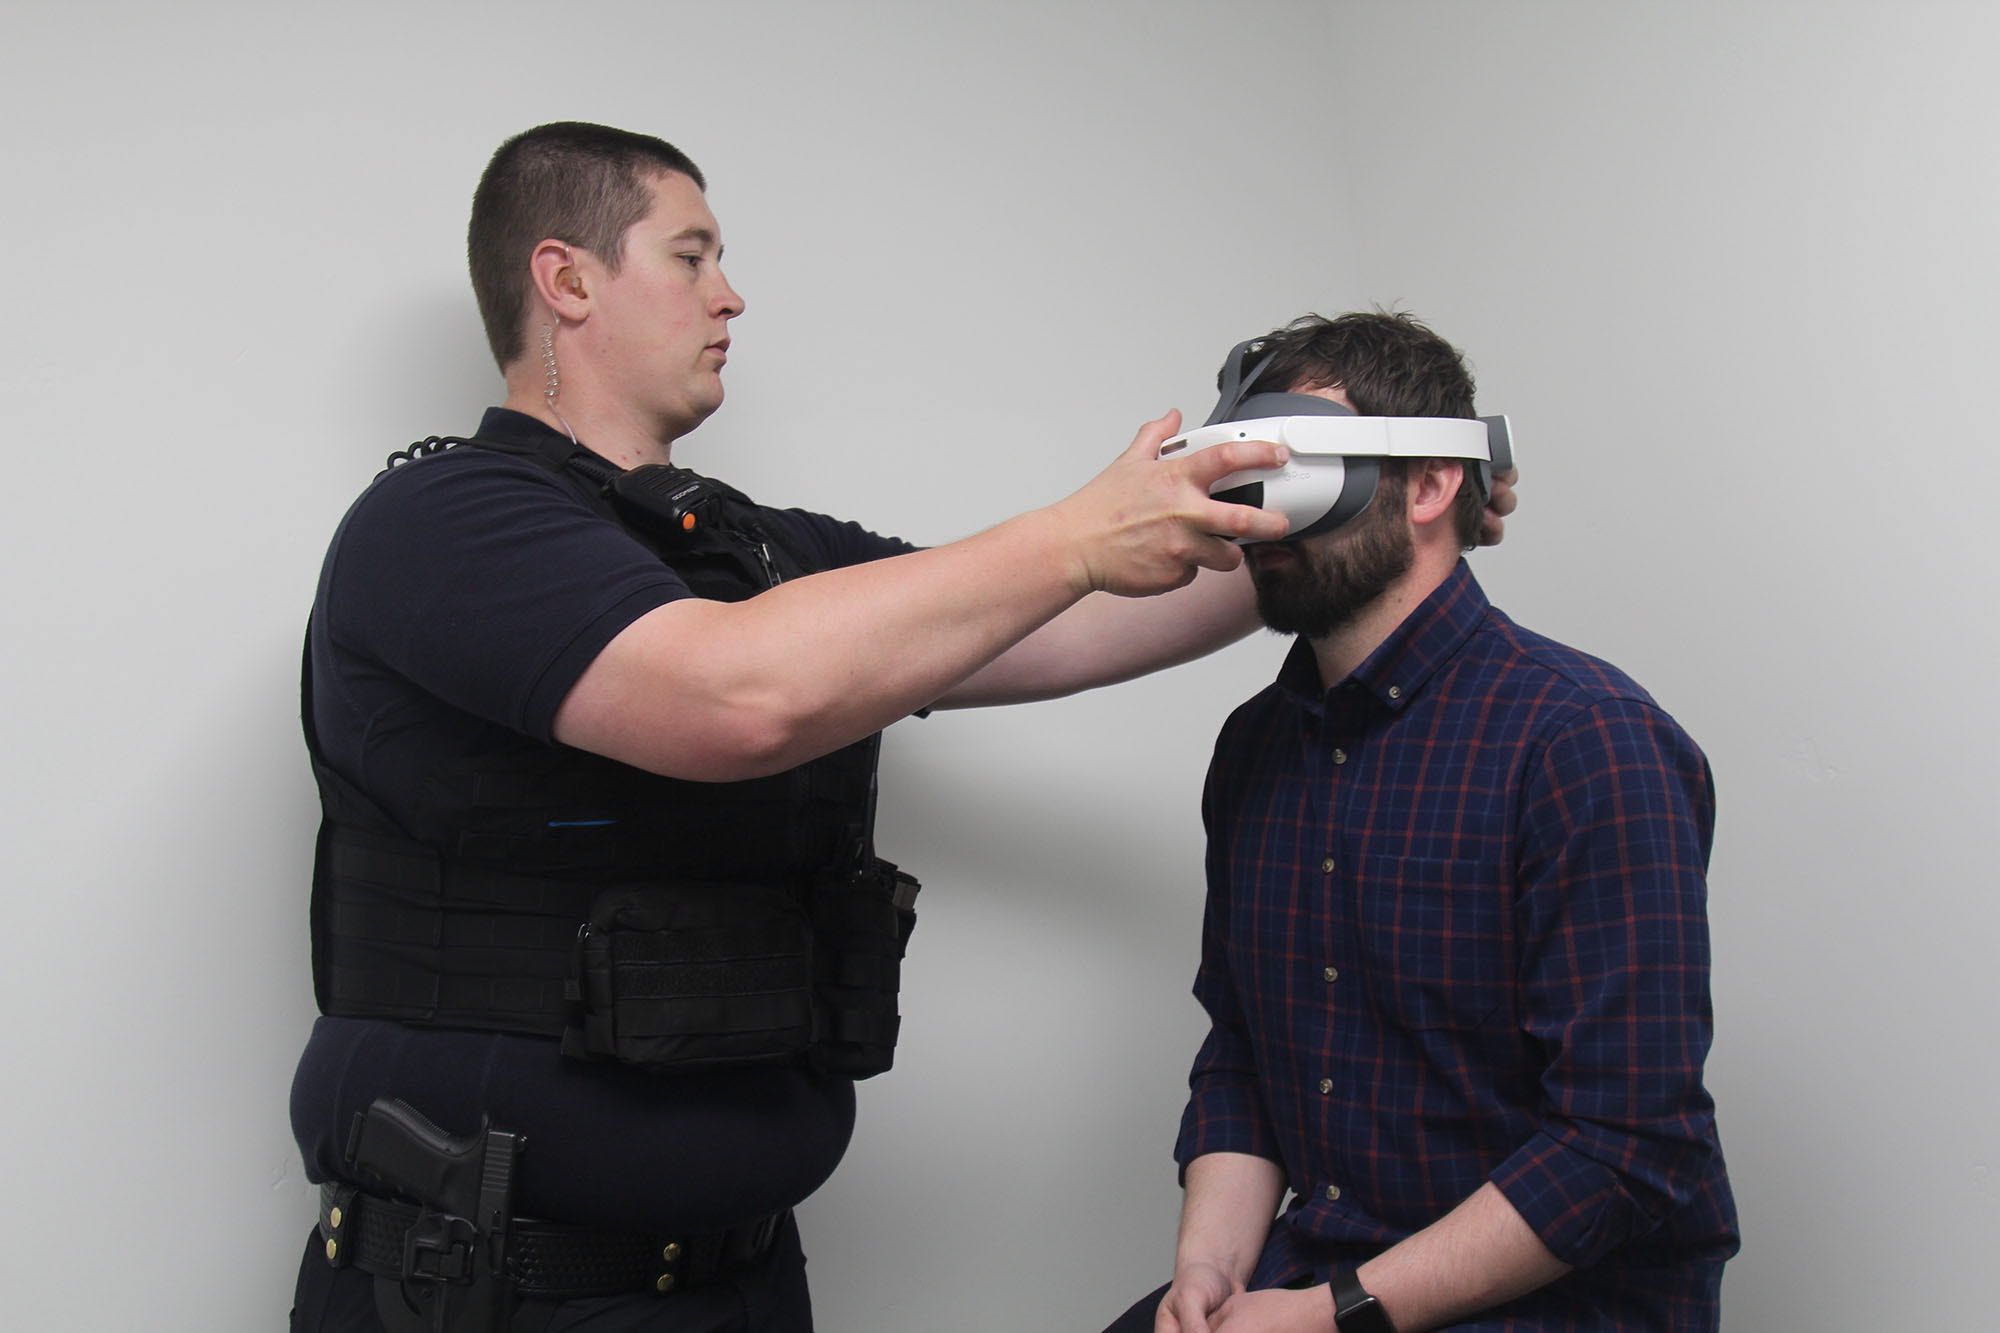 Police officer using VR headset to check for impairment